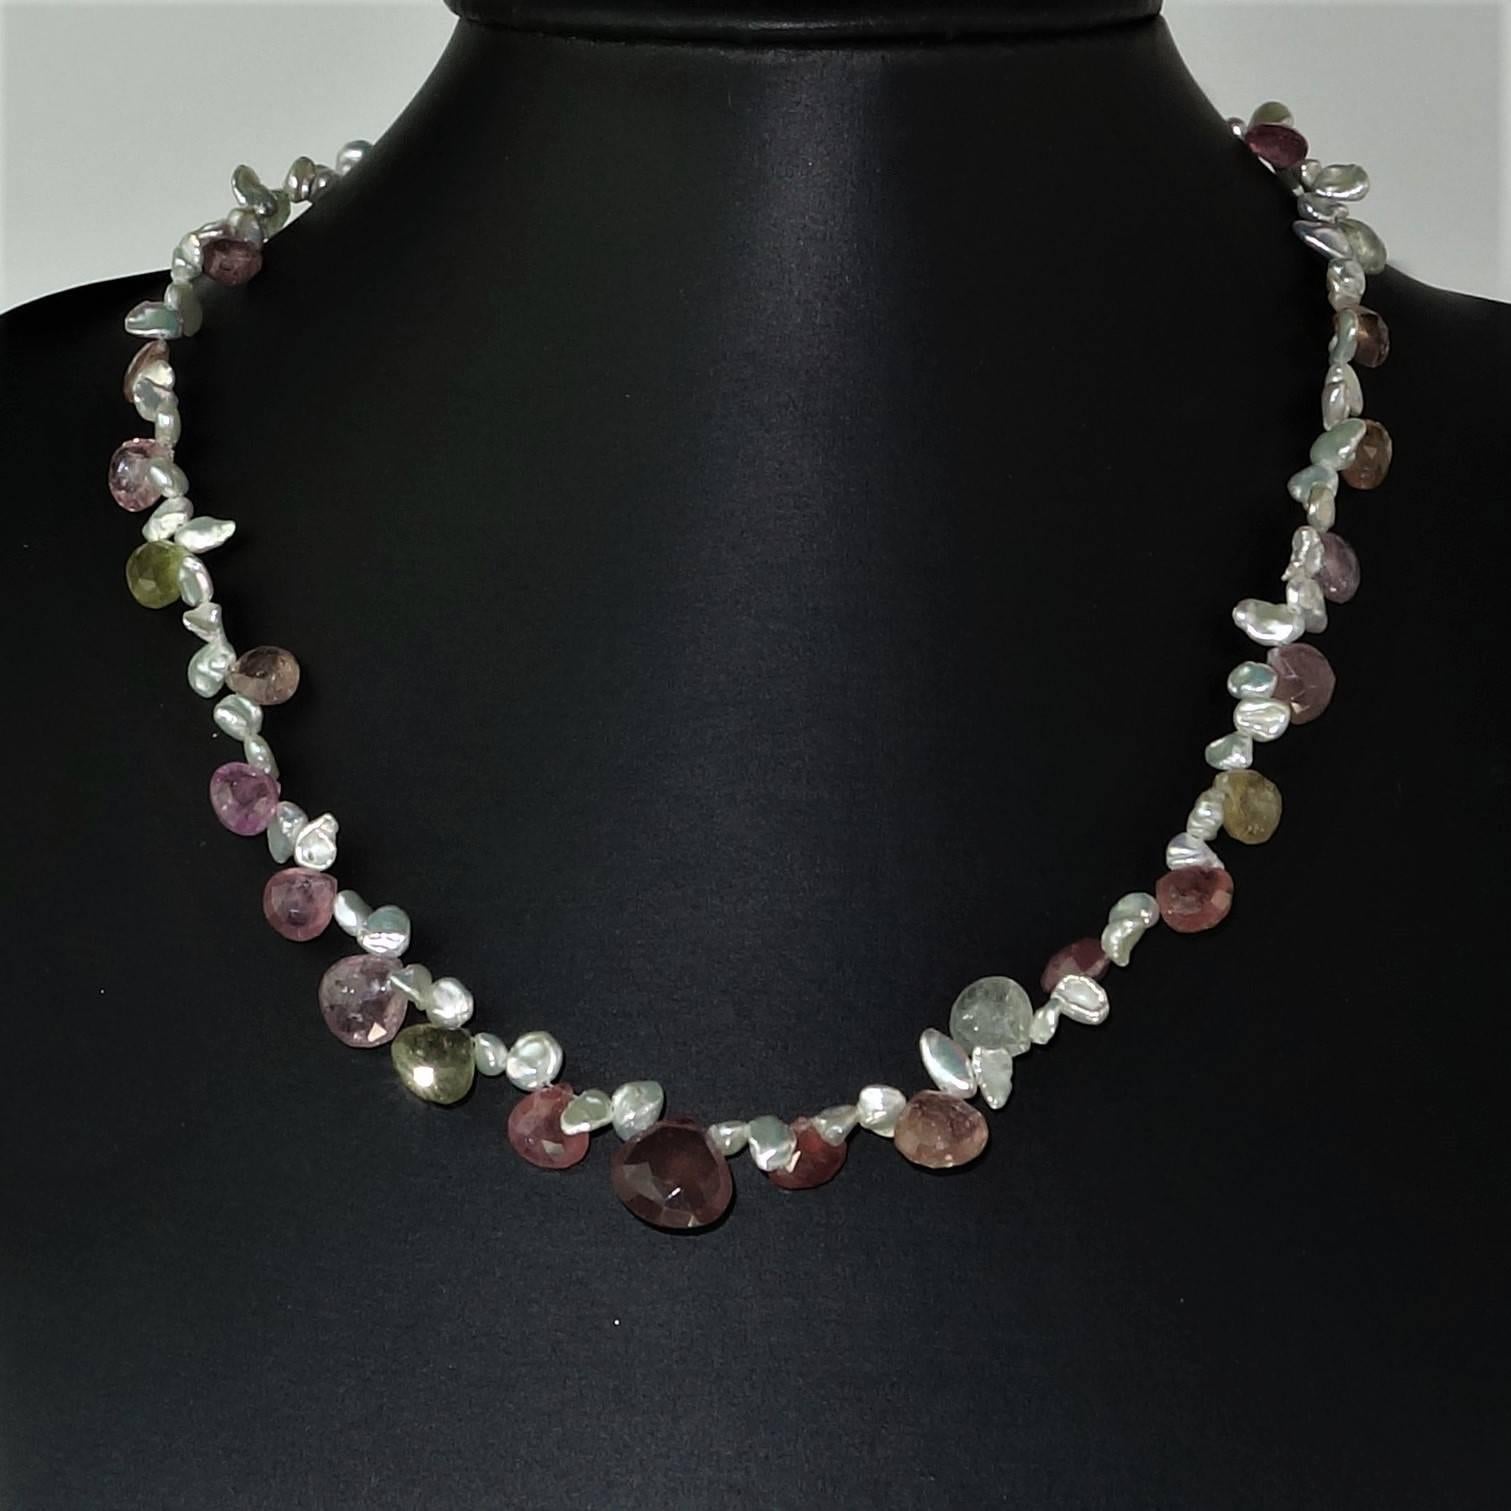 Artisan Gemjunky Choker of Multi-Color Natural Sapphire Biolettes and Freshwater Pearls